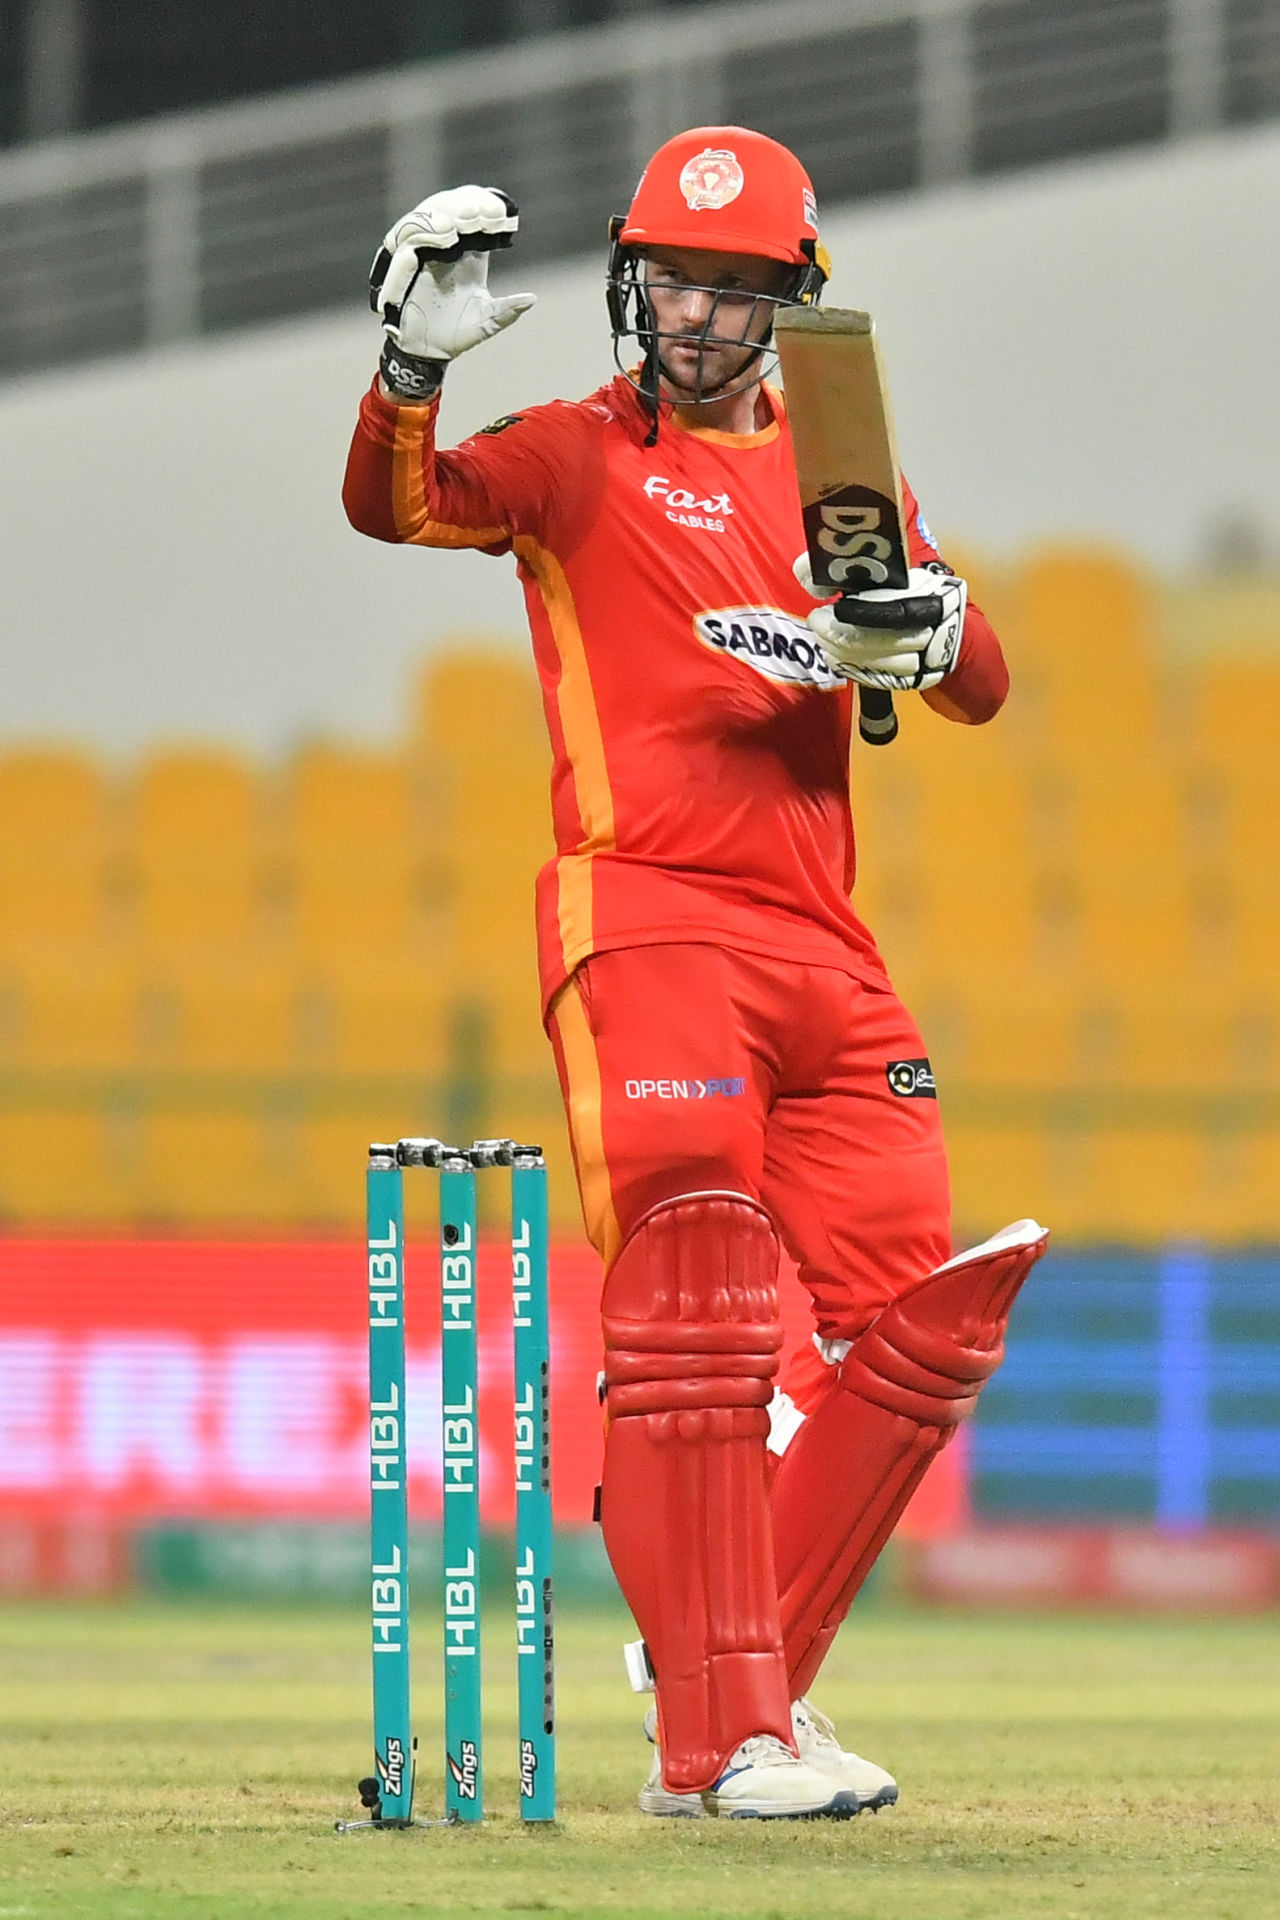 Colin Munro holds up a sign for his kids after reaching a half-century, Islamabad United vs Karachi Kings, PSL 2021, June 15, 2021